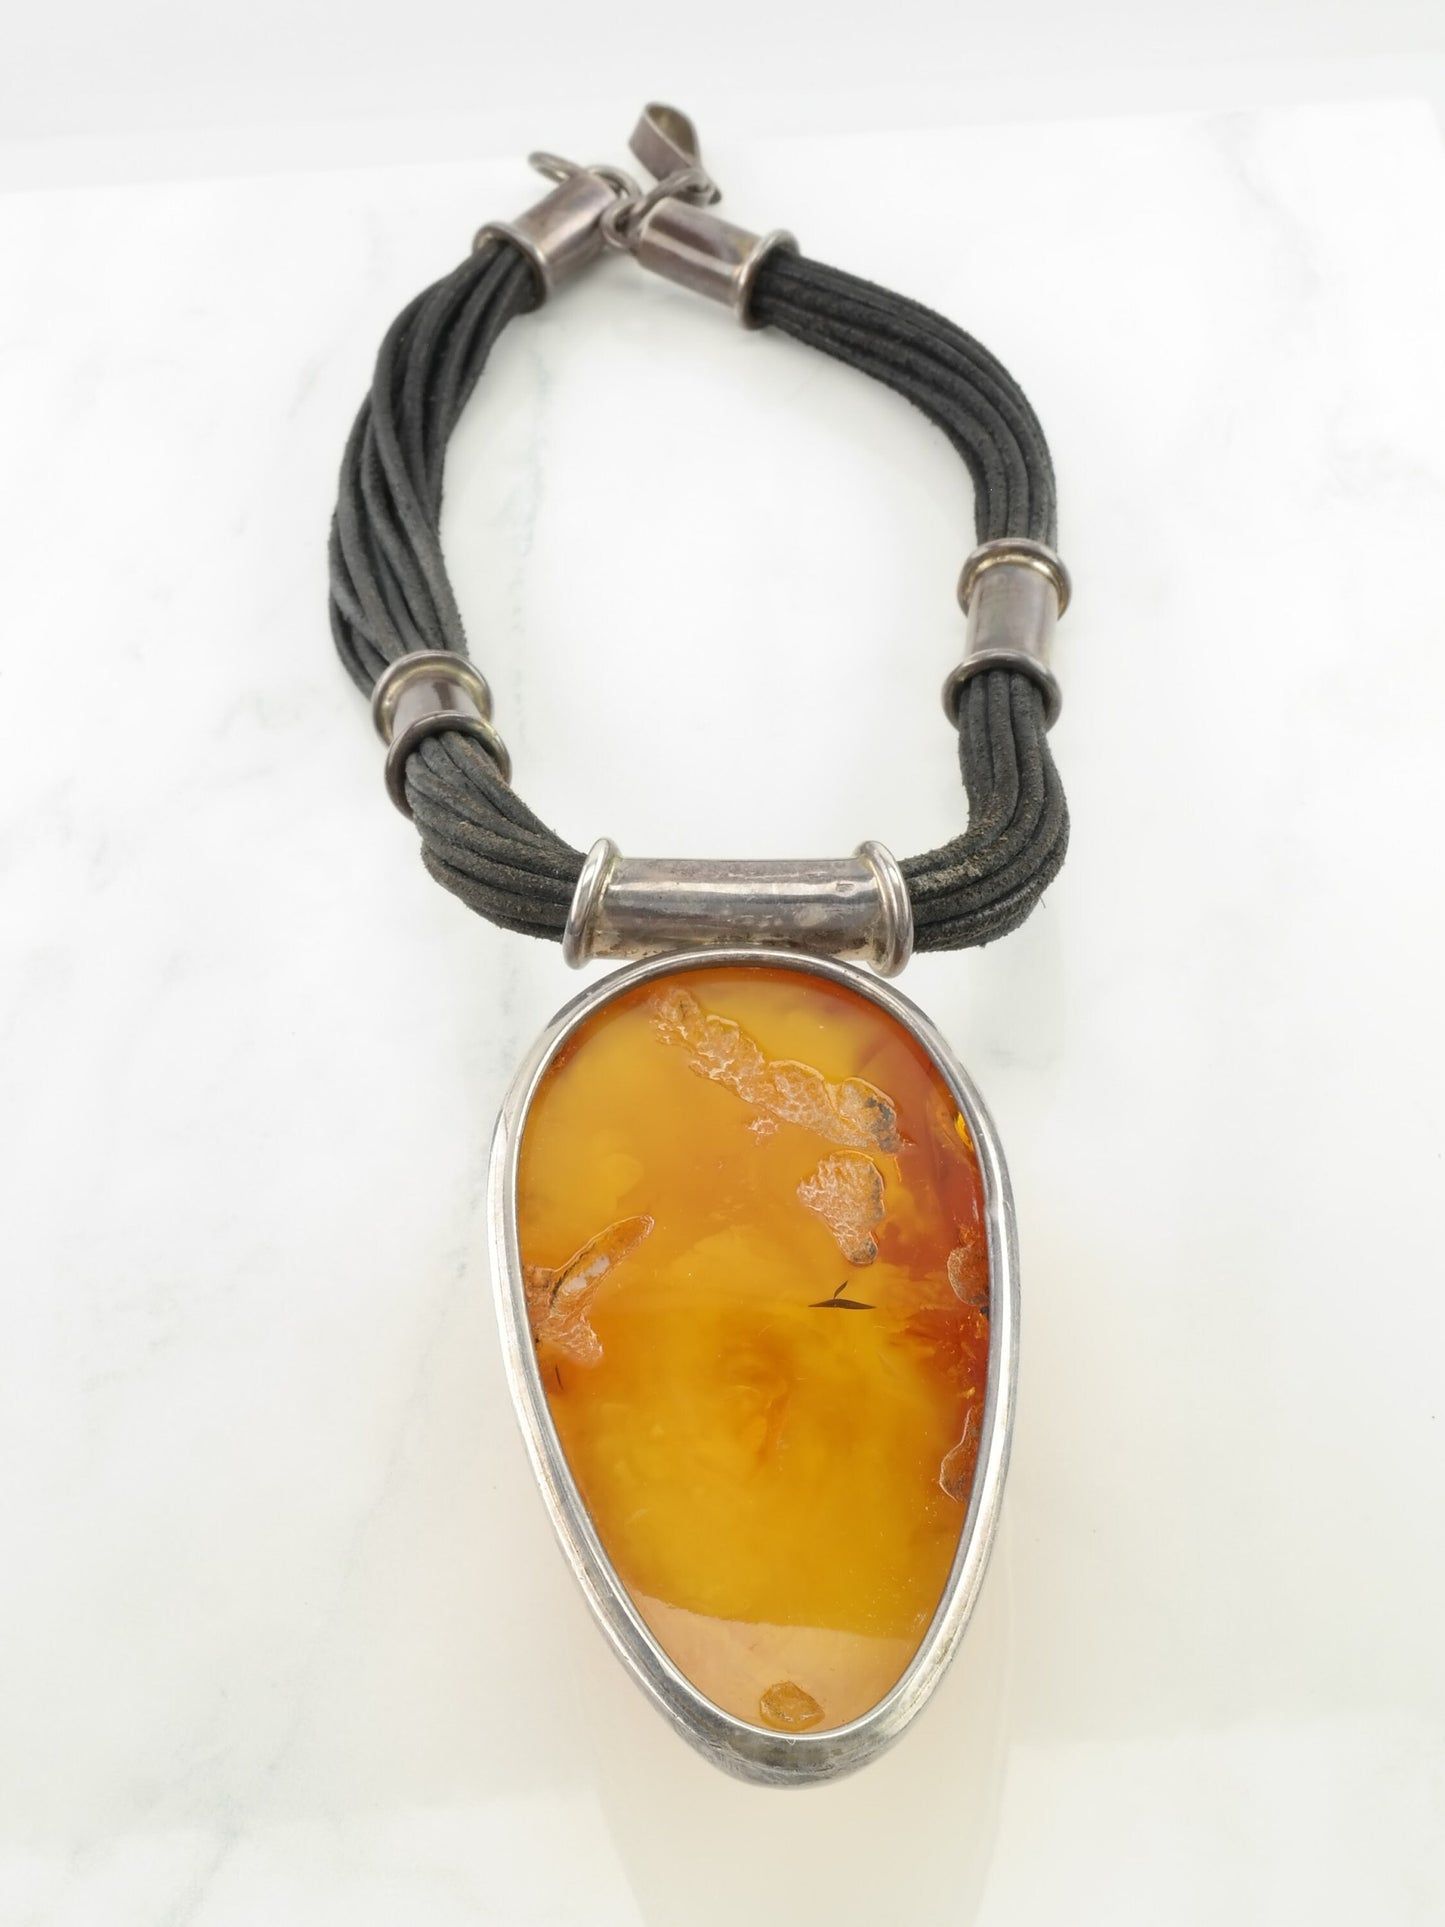 Vintage Enormous Natural Baltic Amber Pendant Duo Tone Leather Cord Sterling Silver Necklace